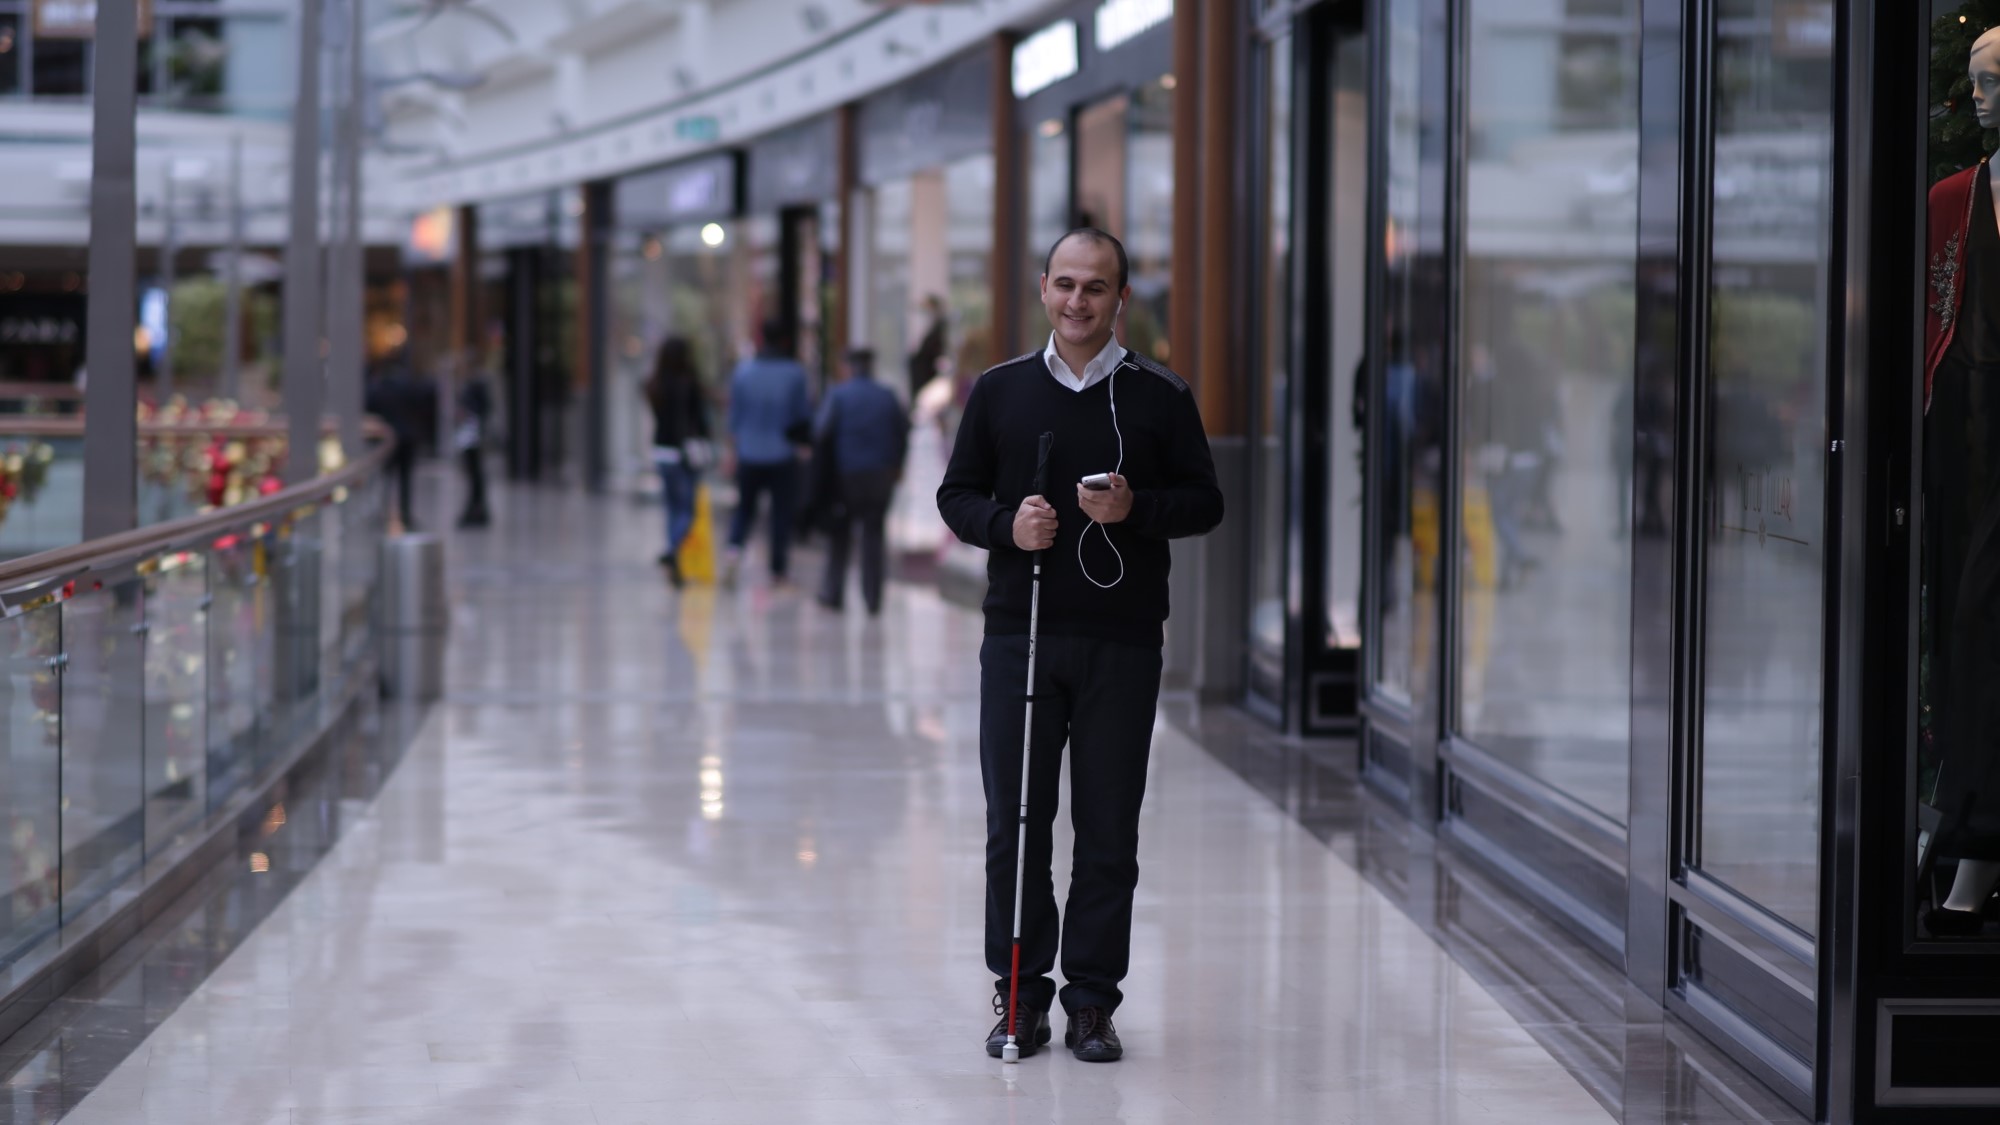 How can visually impaired move freely in indoor places?